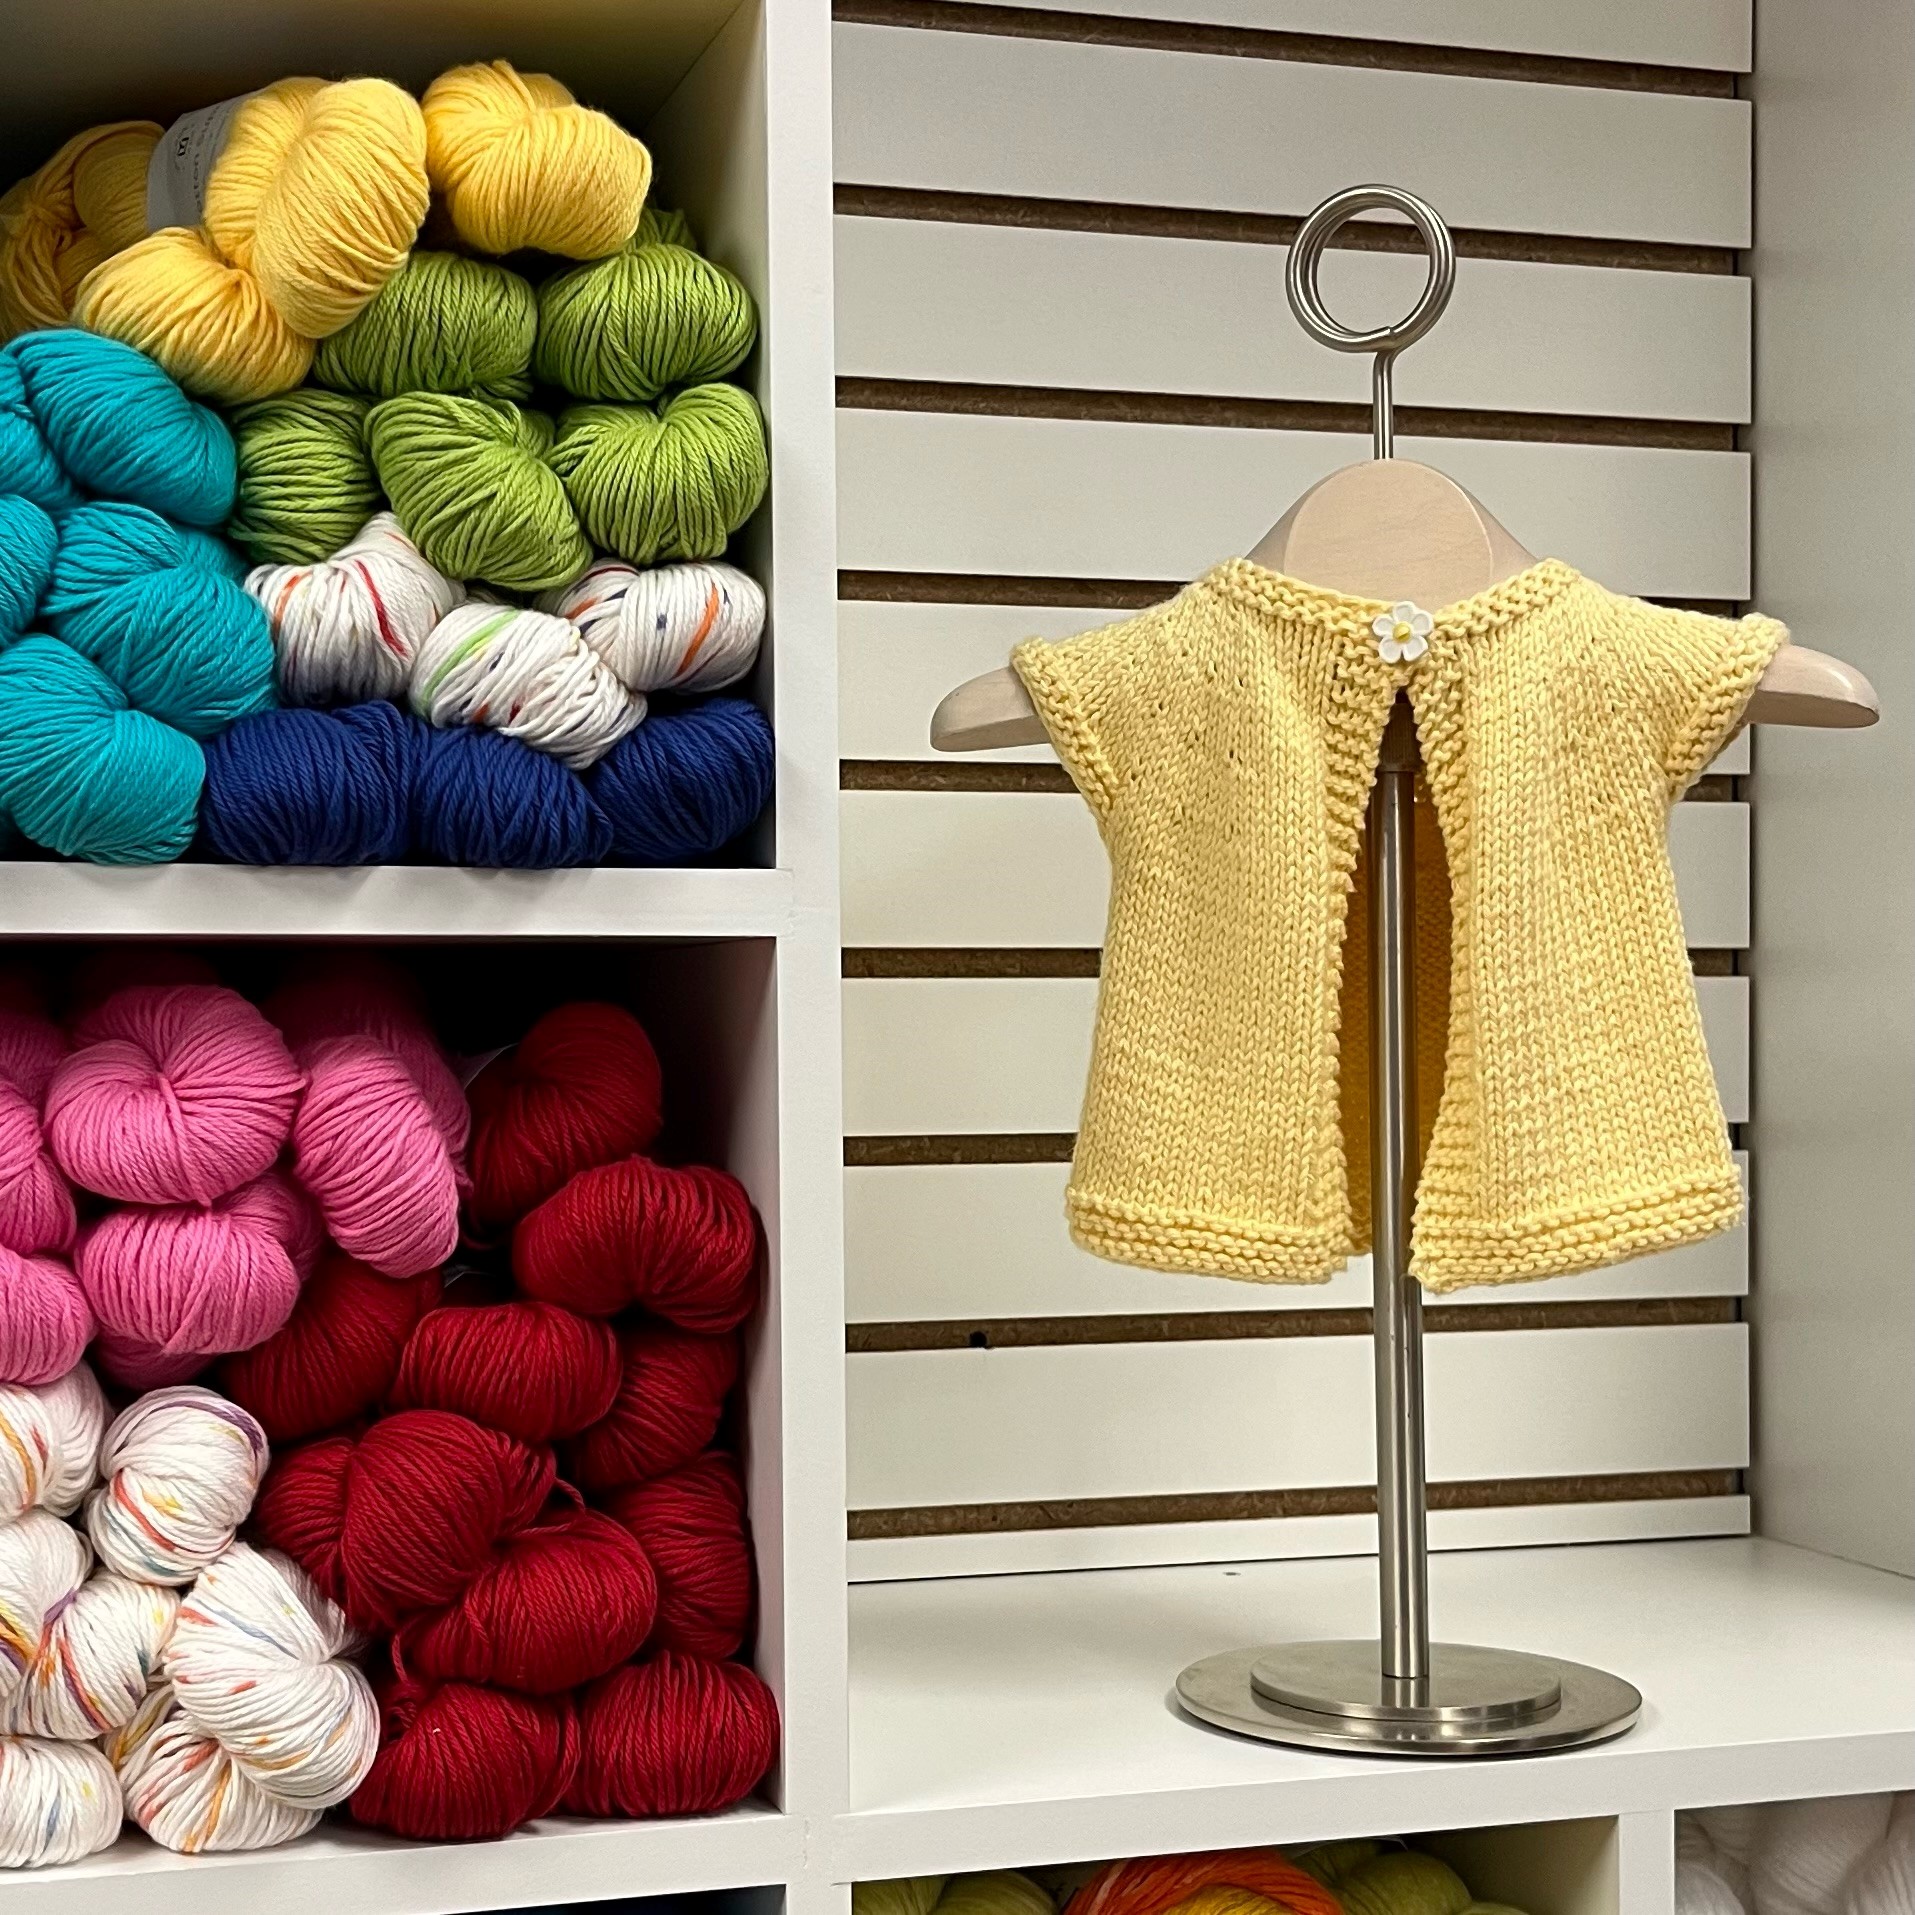 Local yarn shop to participate in 12-hour knit-a-thon for charity